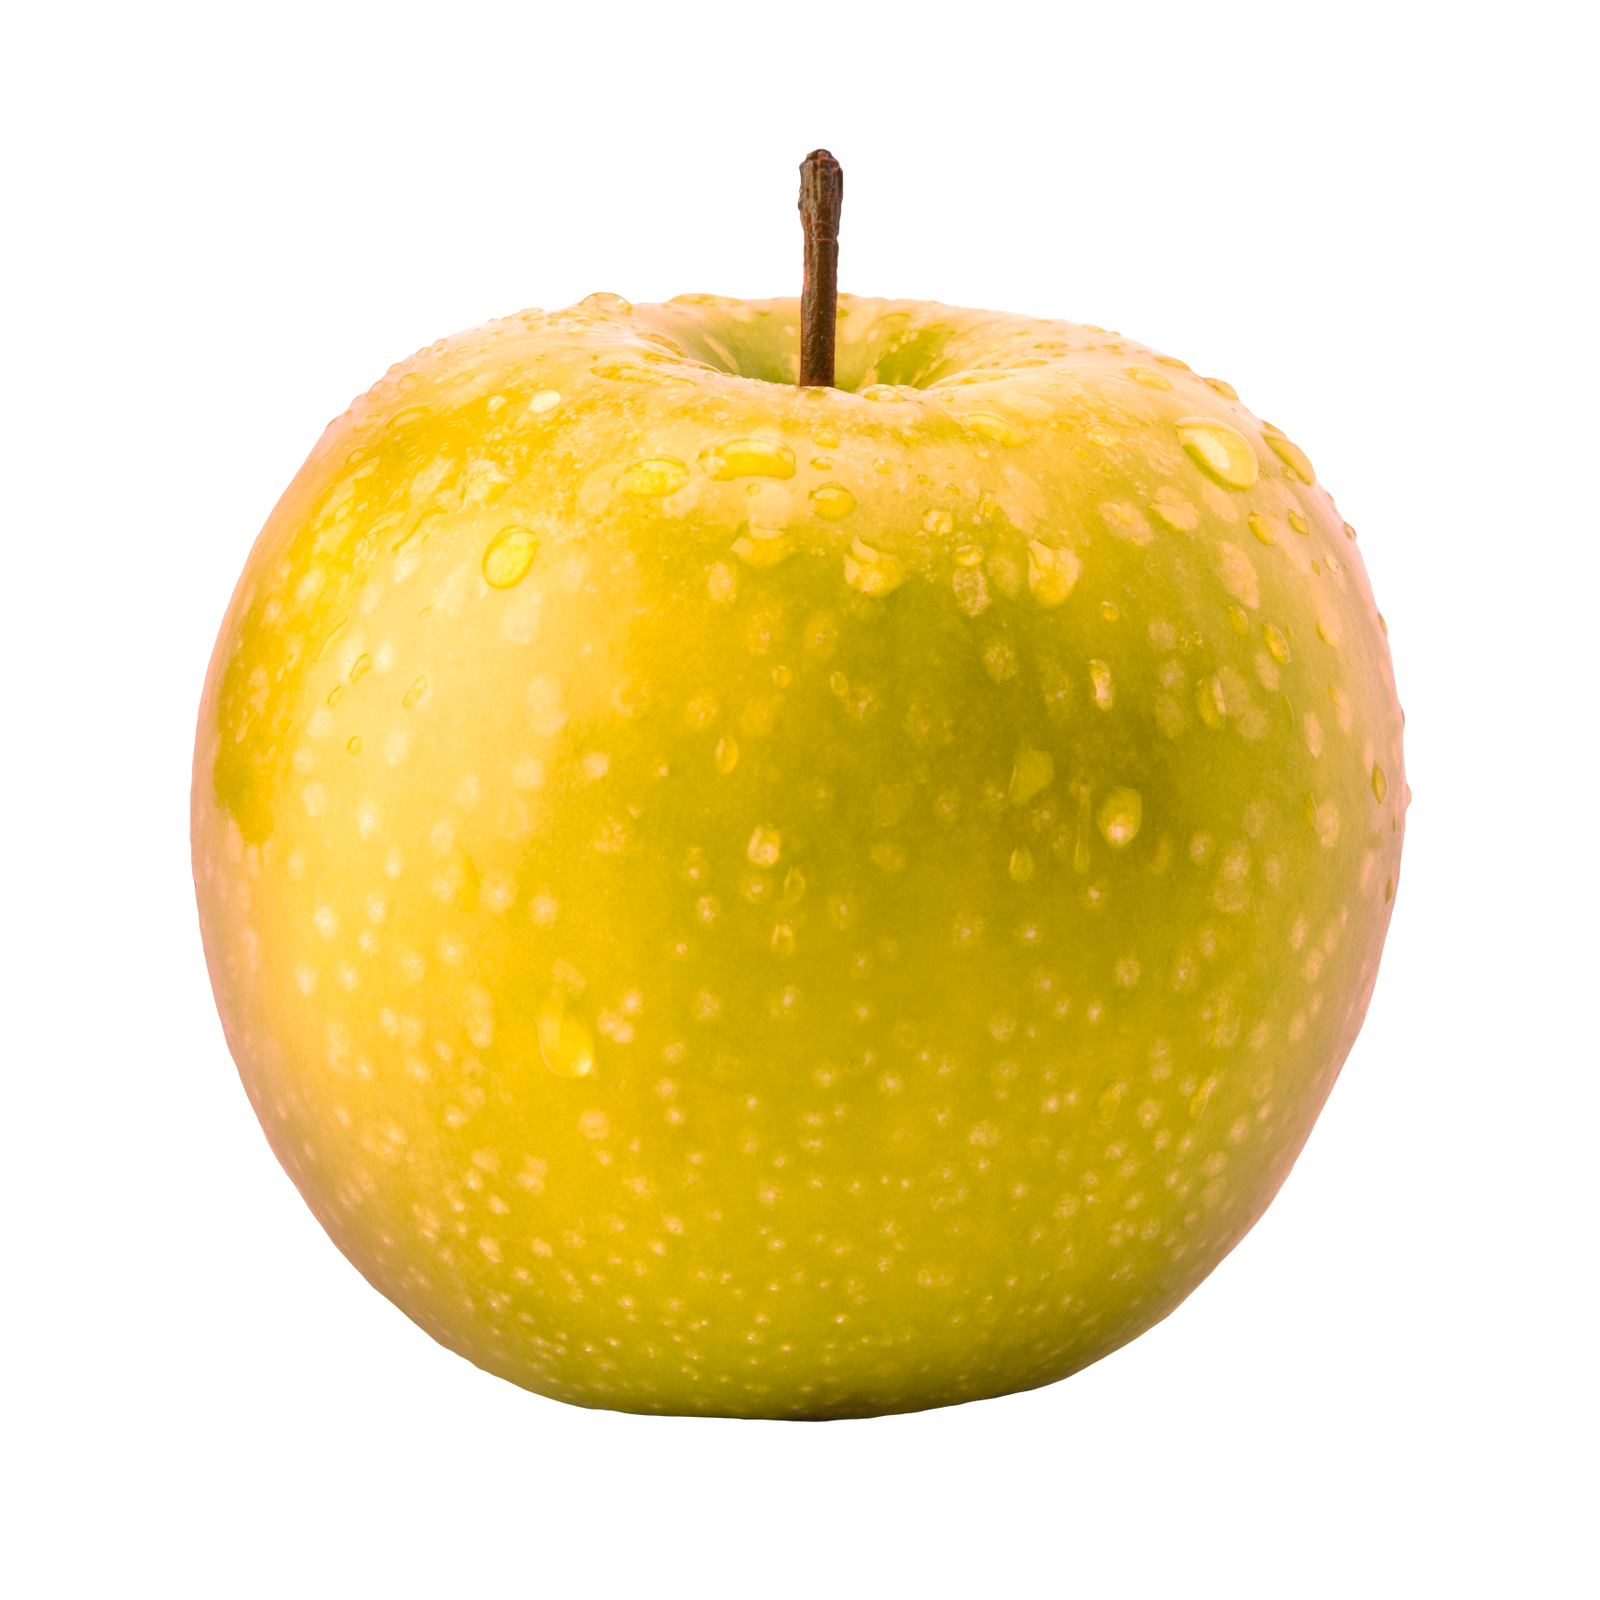 Golden apple on a transparent background. by PRUSSIAART on DeviantArt